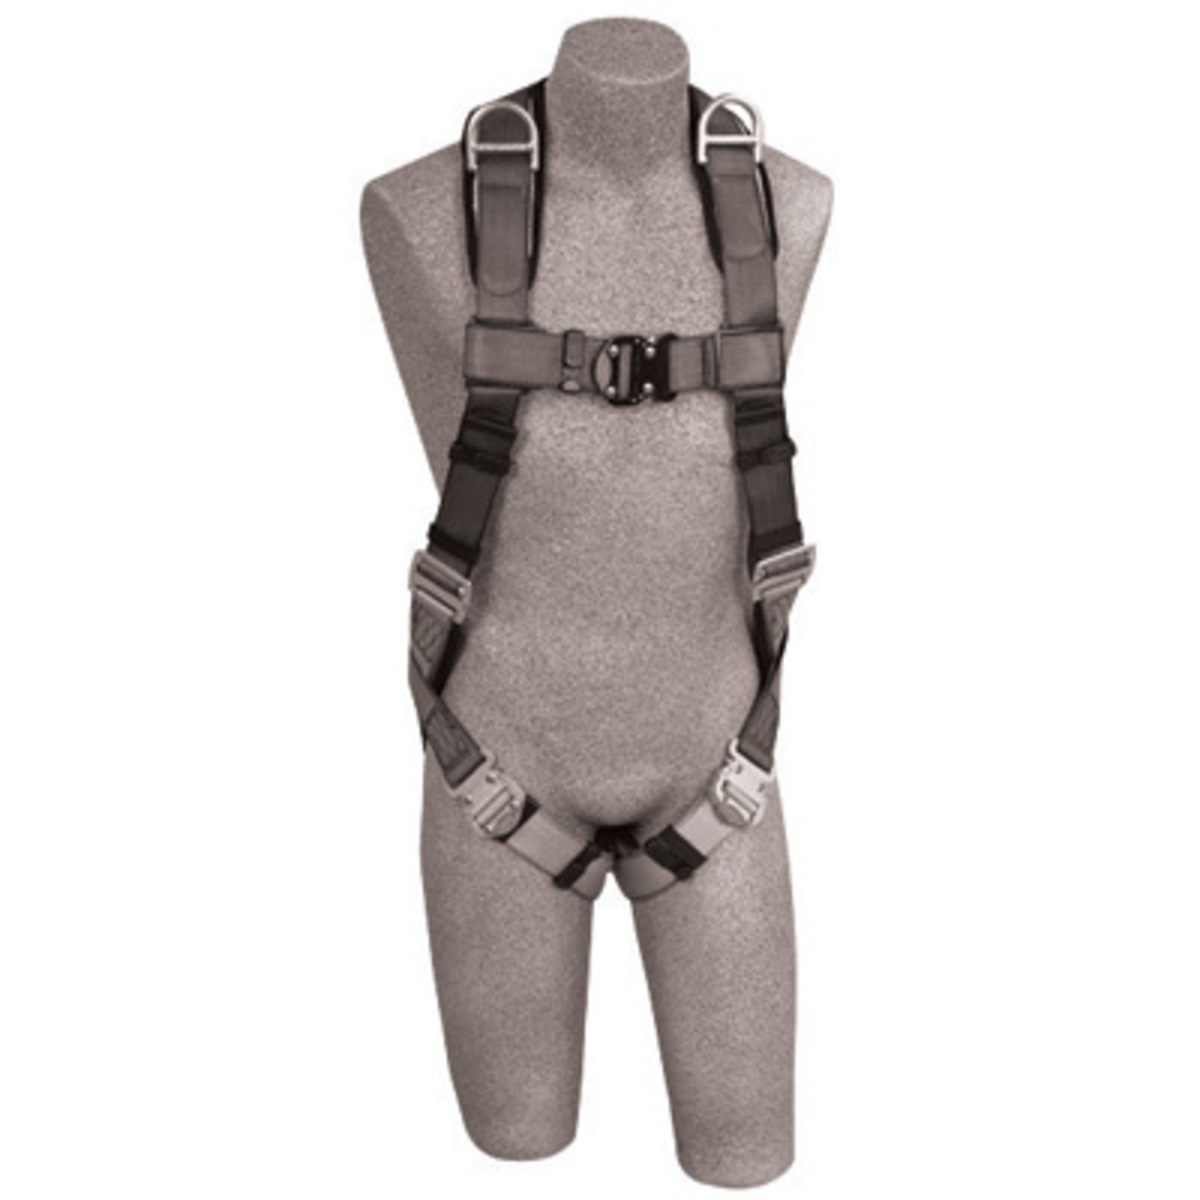 3M™ DBI-SALA® X-Large ExoFit™ Full Body/Vest Style Harness With Back And Shoulder D-Ring, Quick Connect Chest And Leg Strap Buck